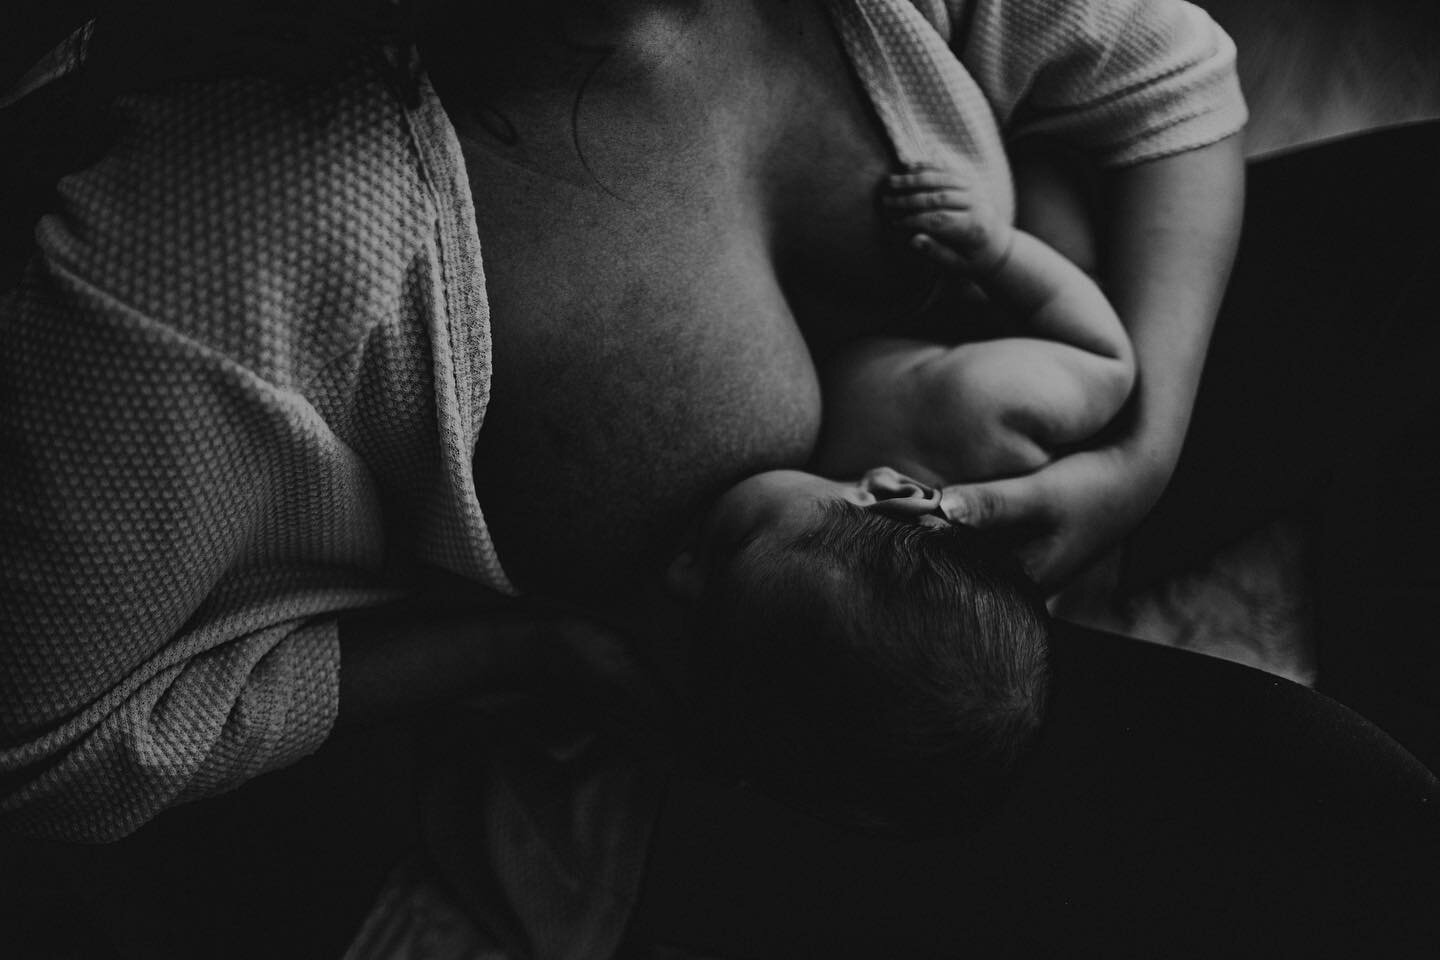 𝘽 𝙍 𝙀 𝘼 𝙎 𝙏 𝙁 𝙀 𝙀 𝘿 𝙄 𝙉 𝙂⁣
⁣
I had this realization, talking to a friend yesterday, that breastfeeding has been apart of my identity for years now. ⁣
⁣
Since 𝟮𝟬𝟭𝟱 I&rsquo;ve either been pregnant, breastfeeding, or 𝘽𝙊𝙏𝙃. ⁣
⁣
𝘕𝘶?